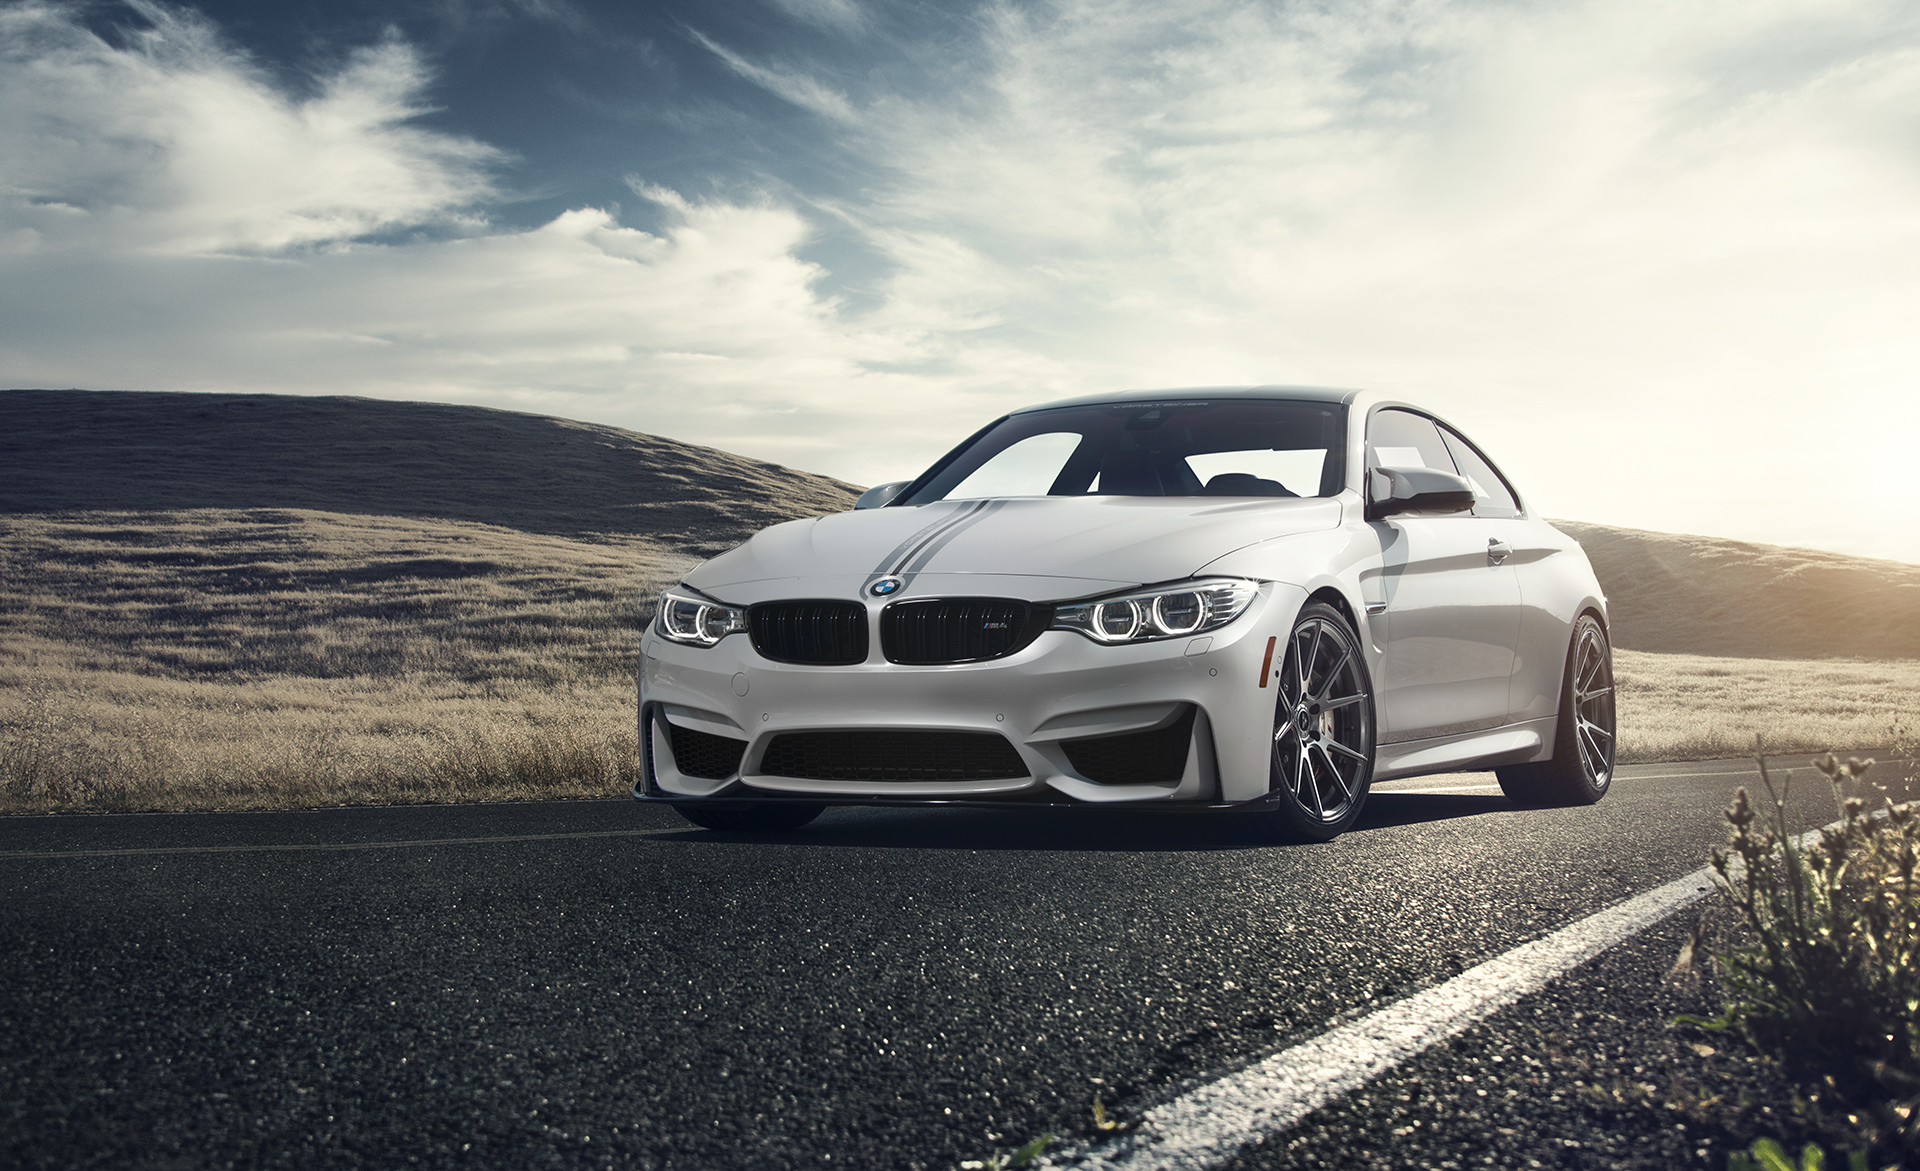  BMW  M4 Wallpapers  Pictures Images